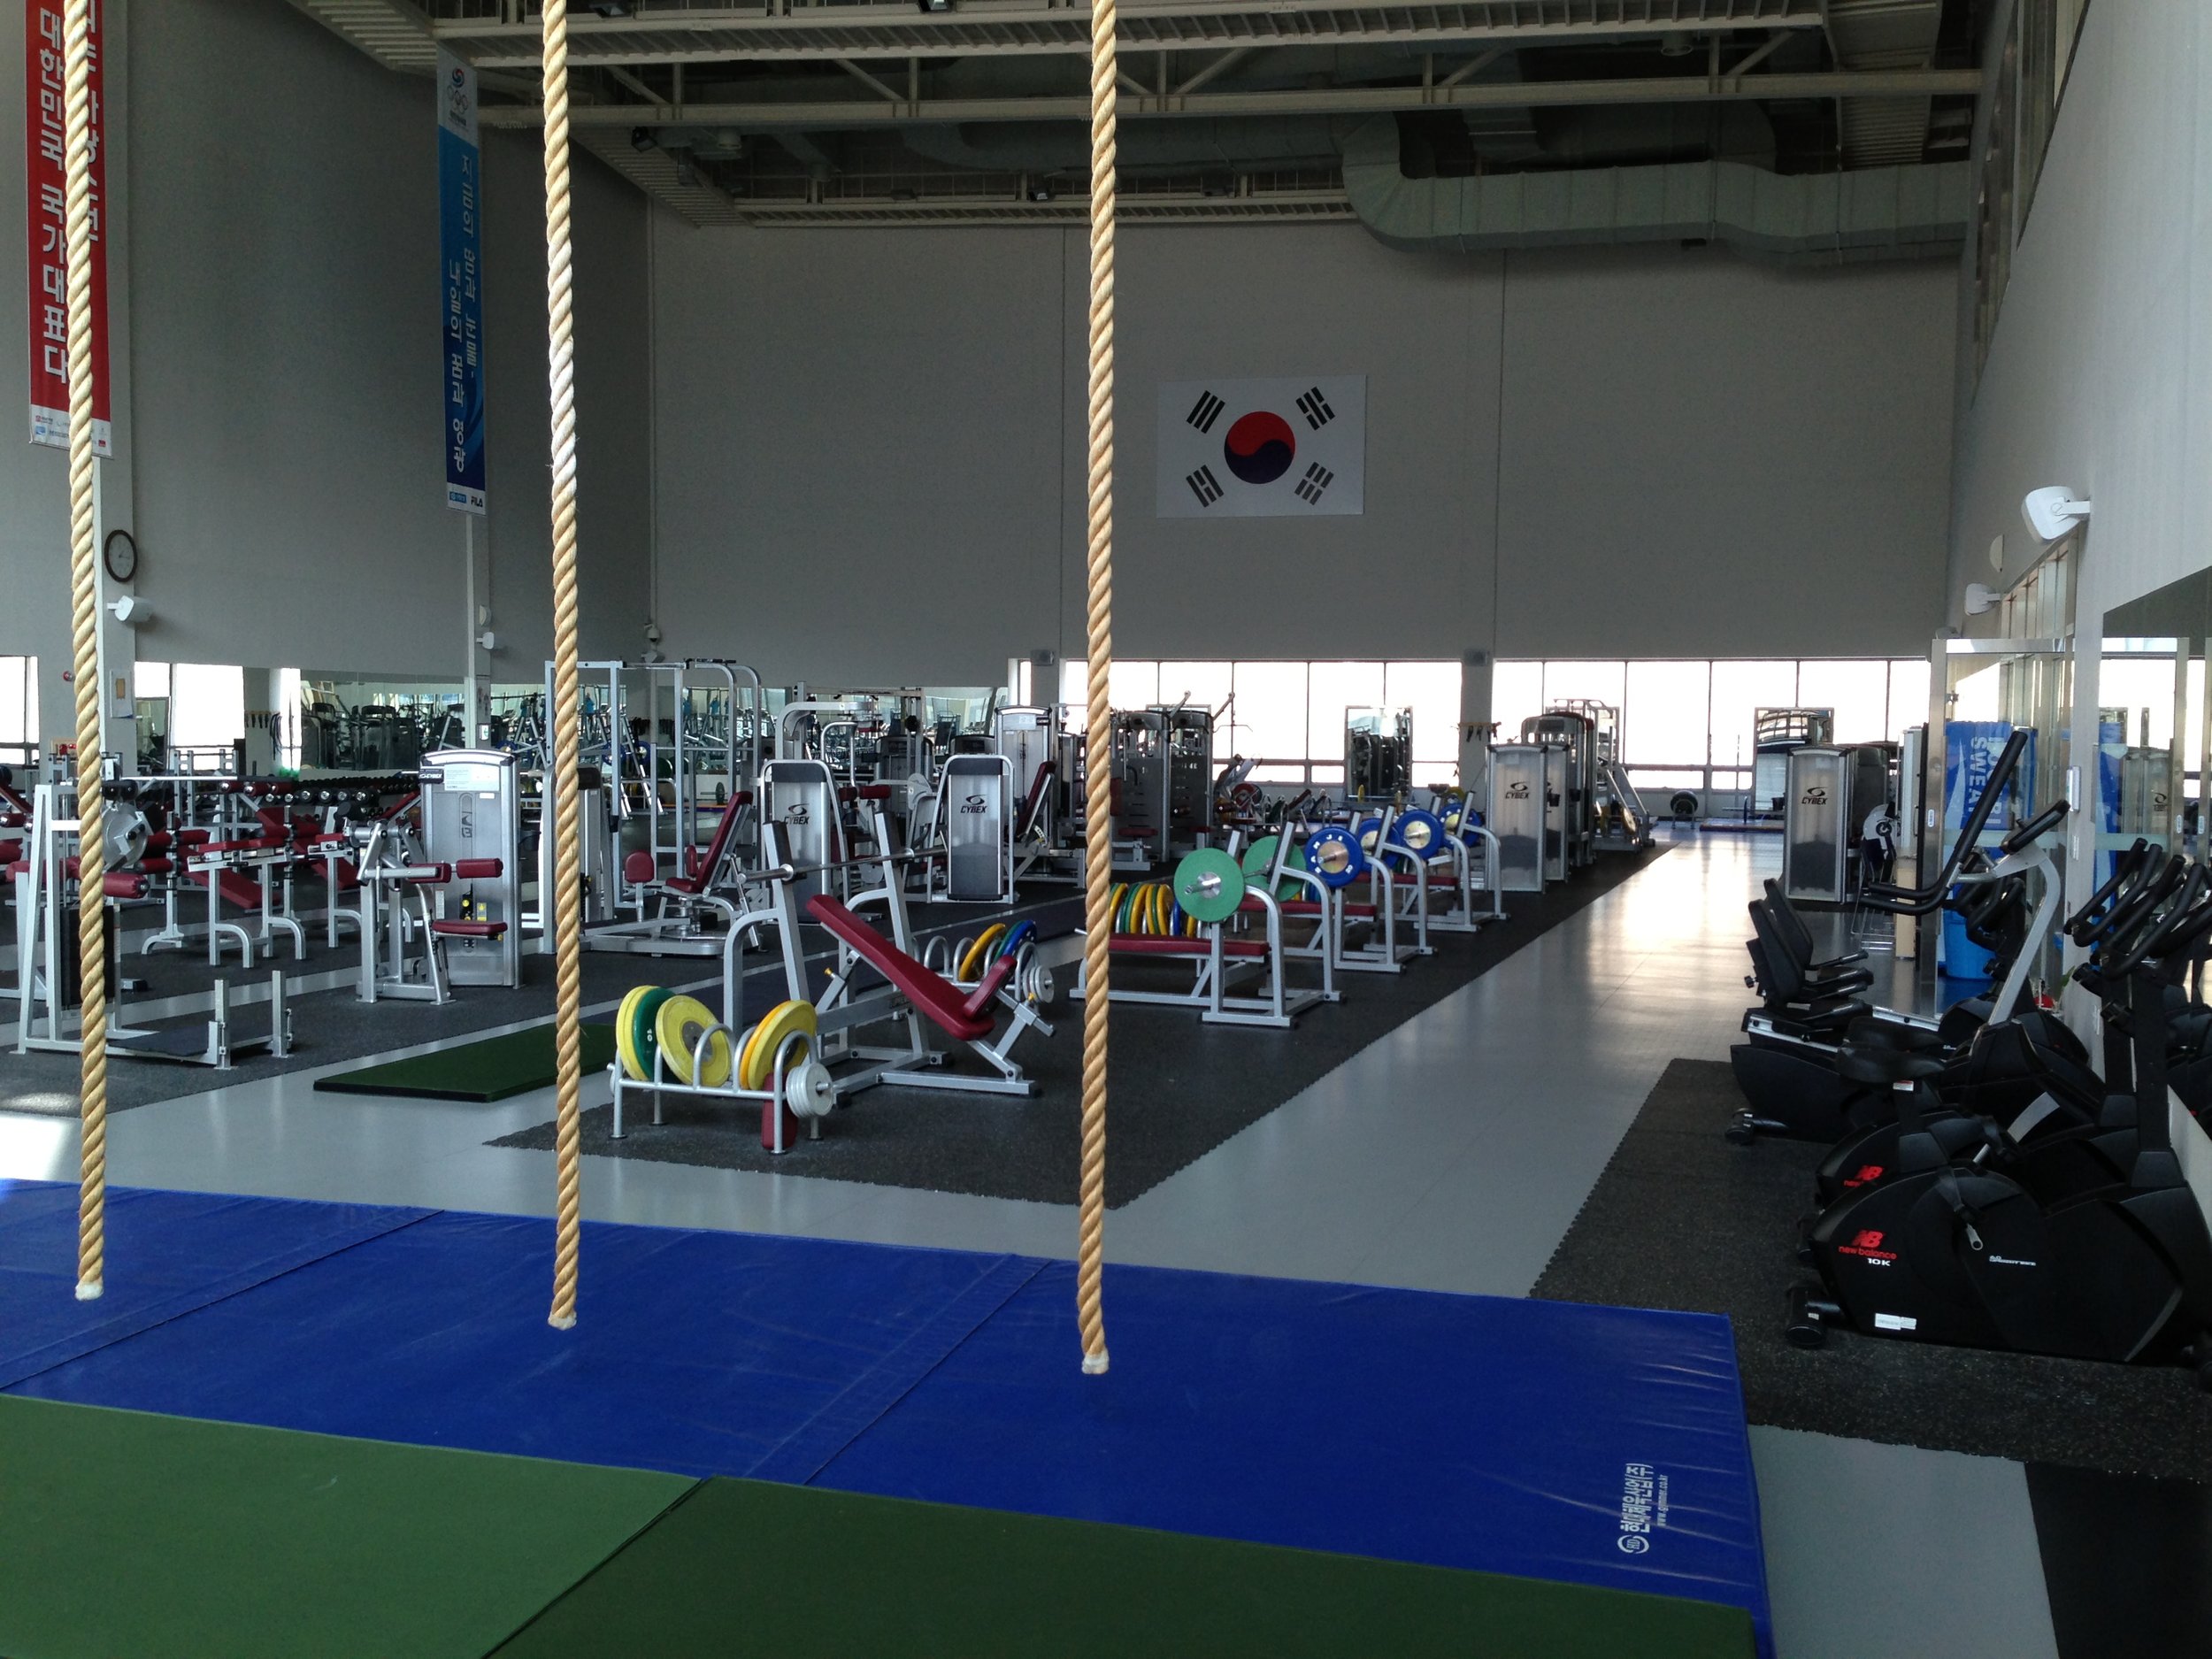 The Jincheon center weight and strength-training room